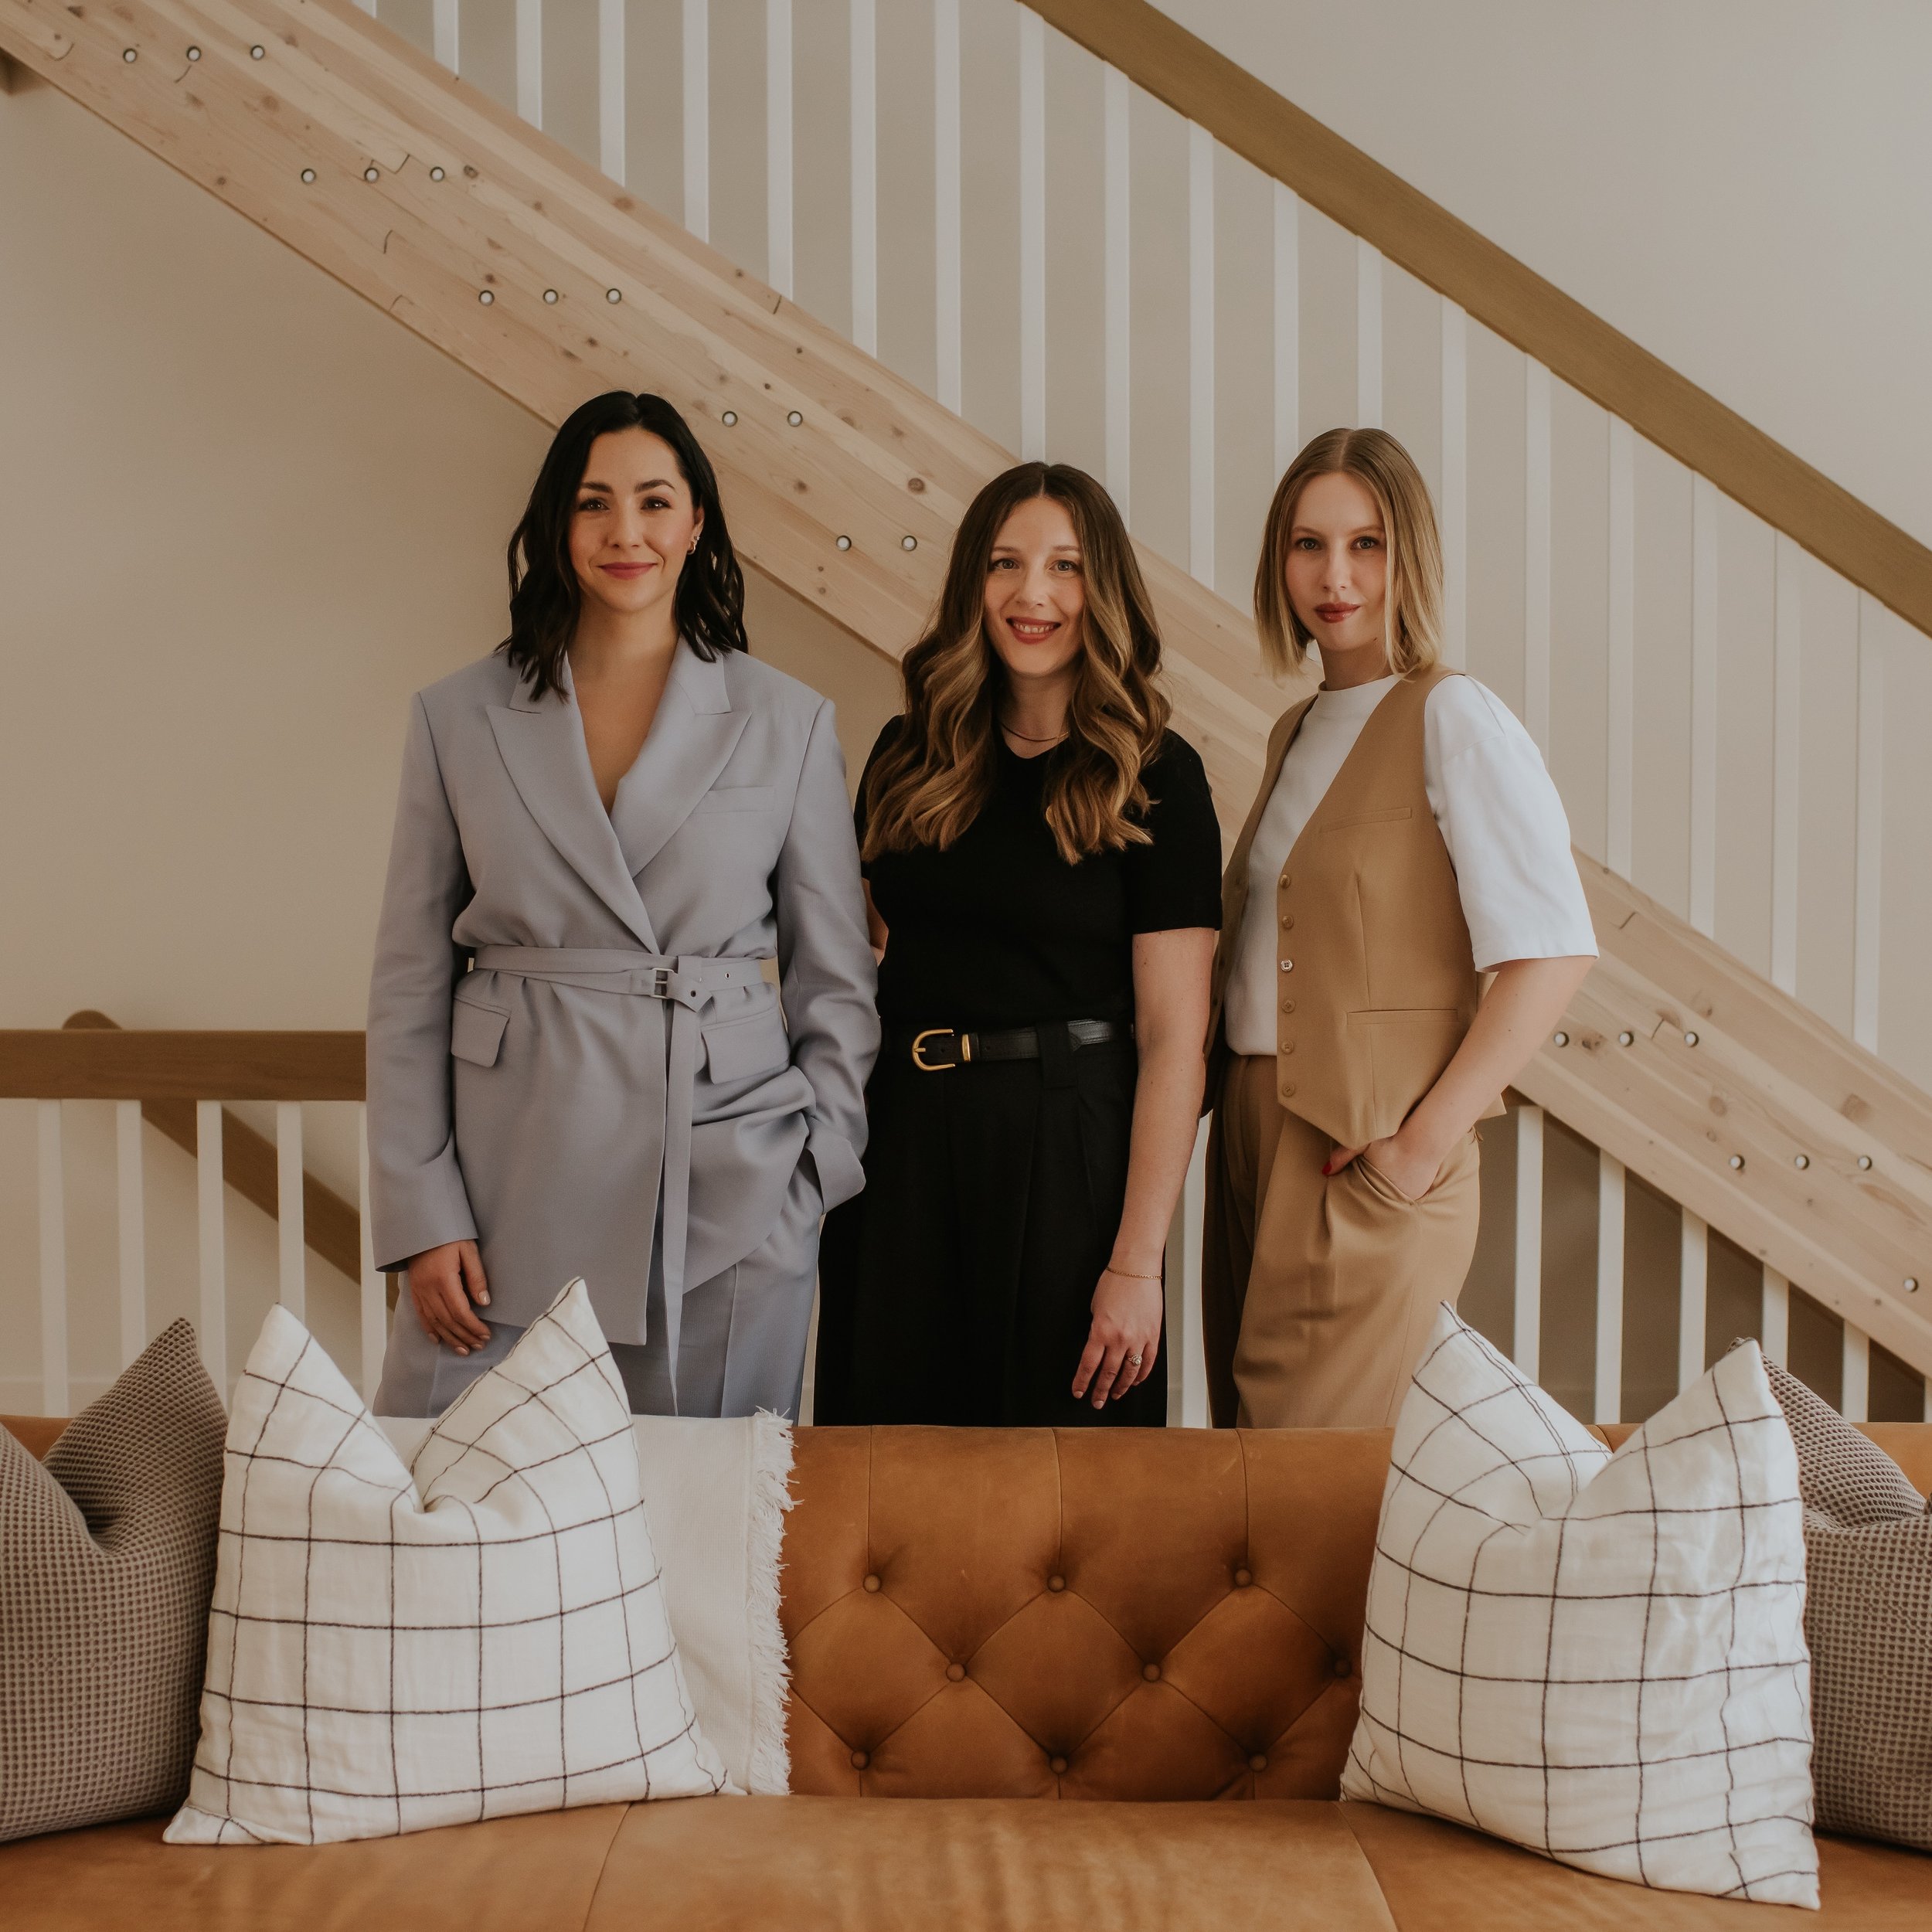 Say Hello to the design team at Outline Homes: Brittany, Hayley, and Mel! 🌟

Our dynamic team is dedicated to turning your vision into reality, working closely with you to understand your unique needs and style preferences. 

Interested in learning 